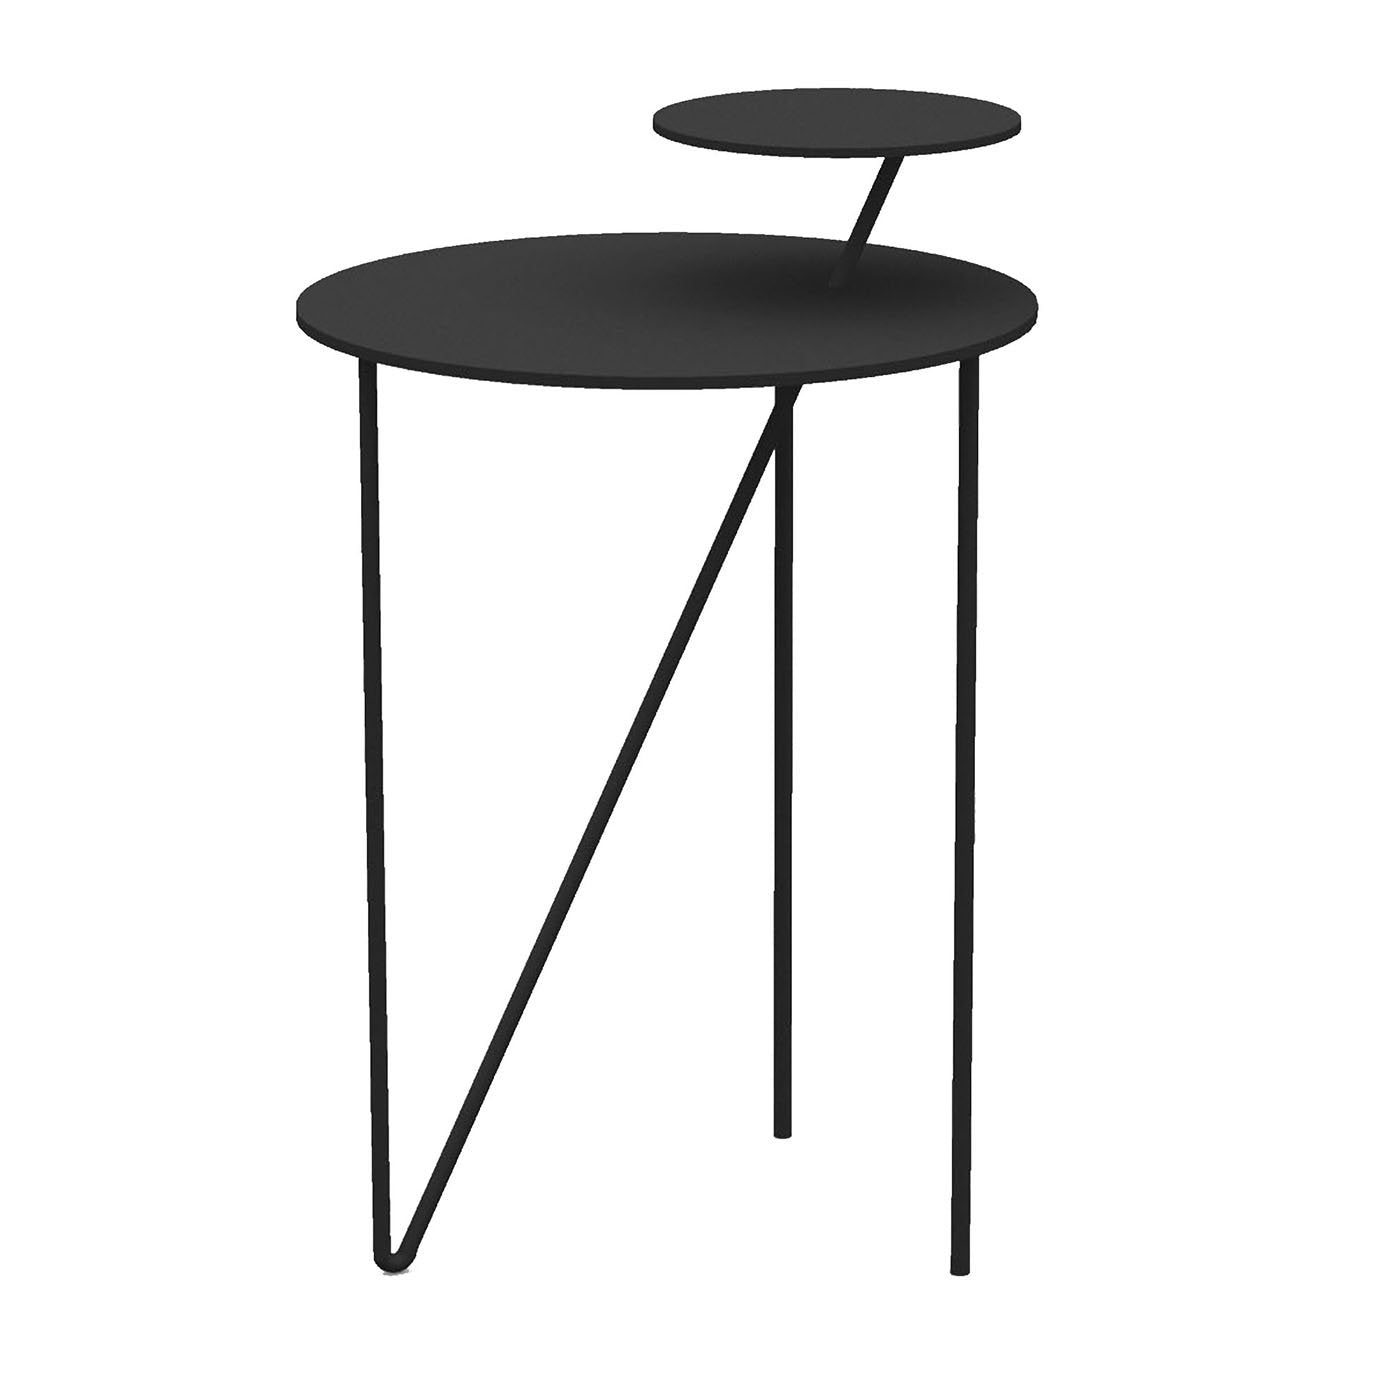 Passante Tall Anthracite Coffee Table - Alternative view 1